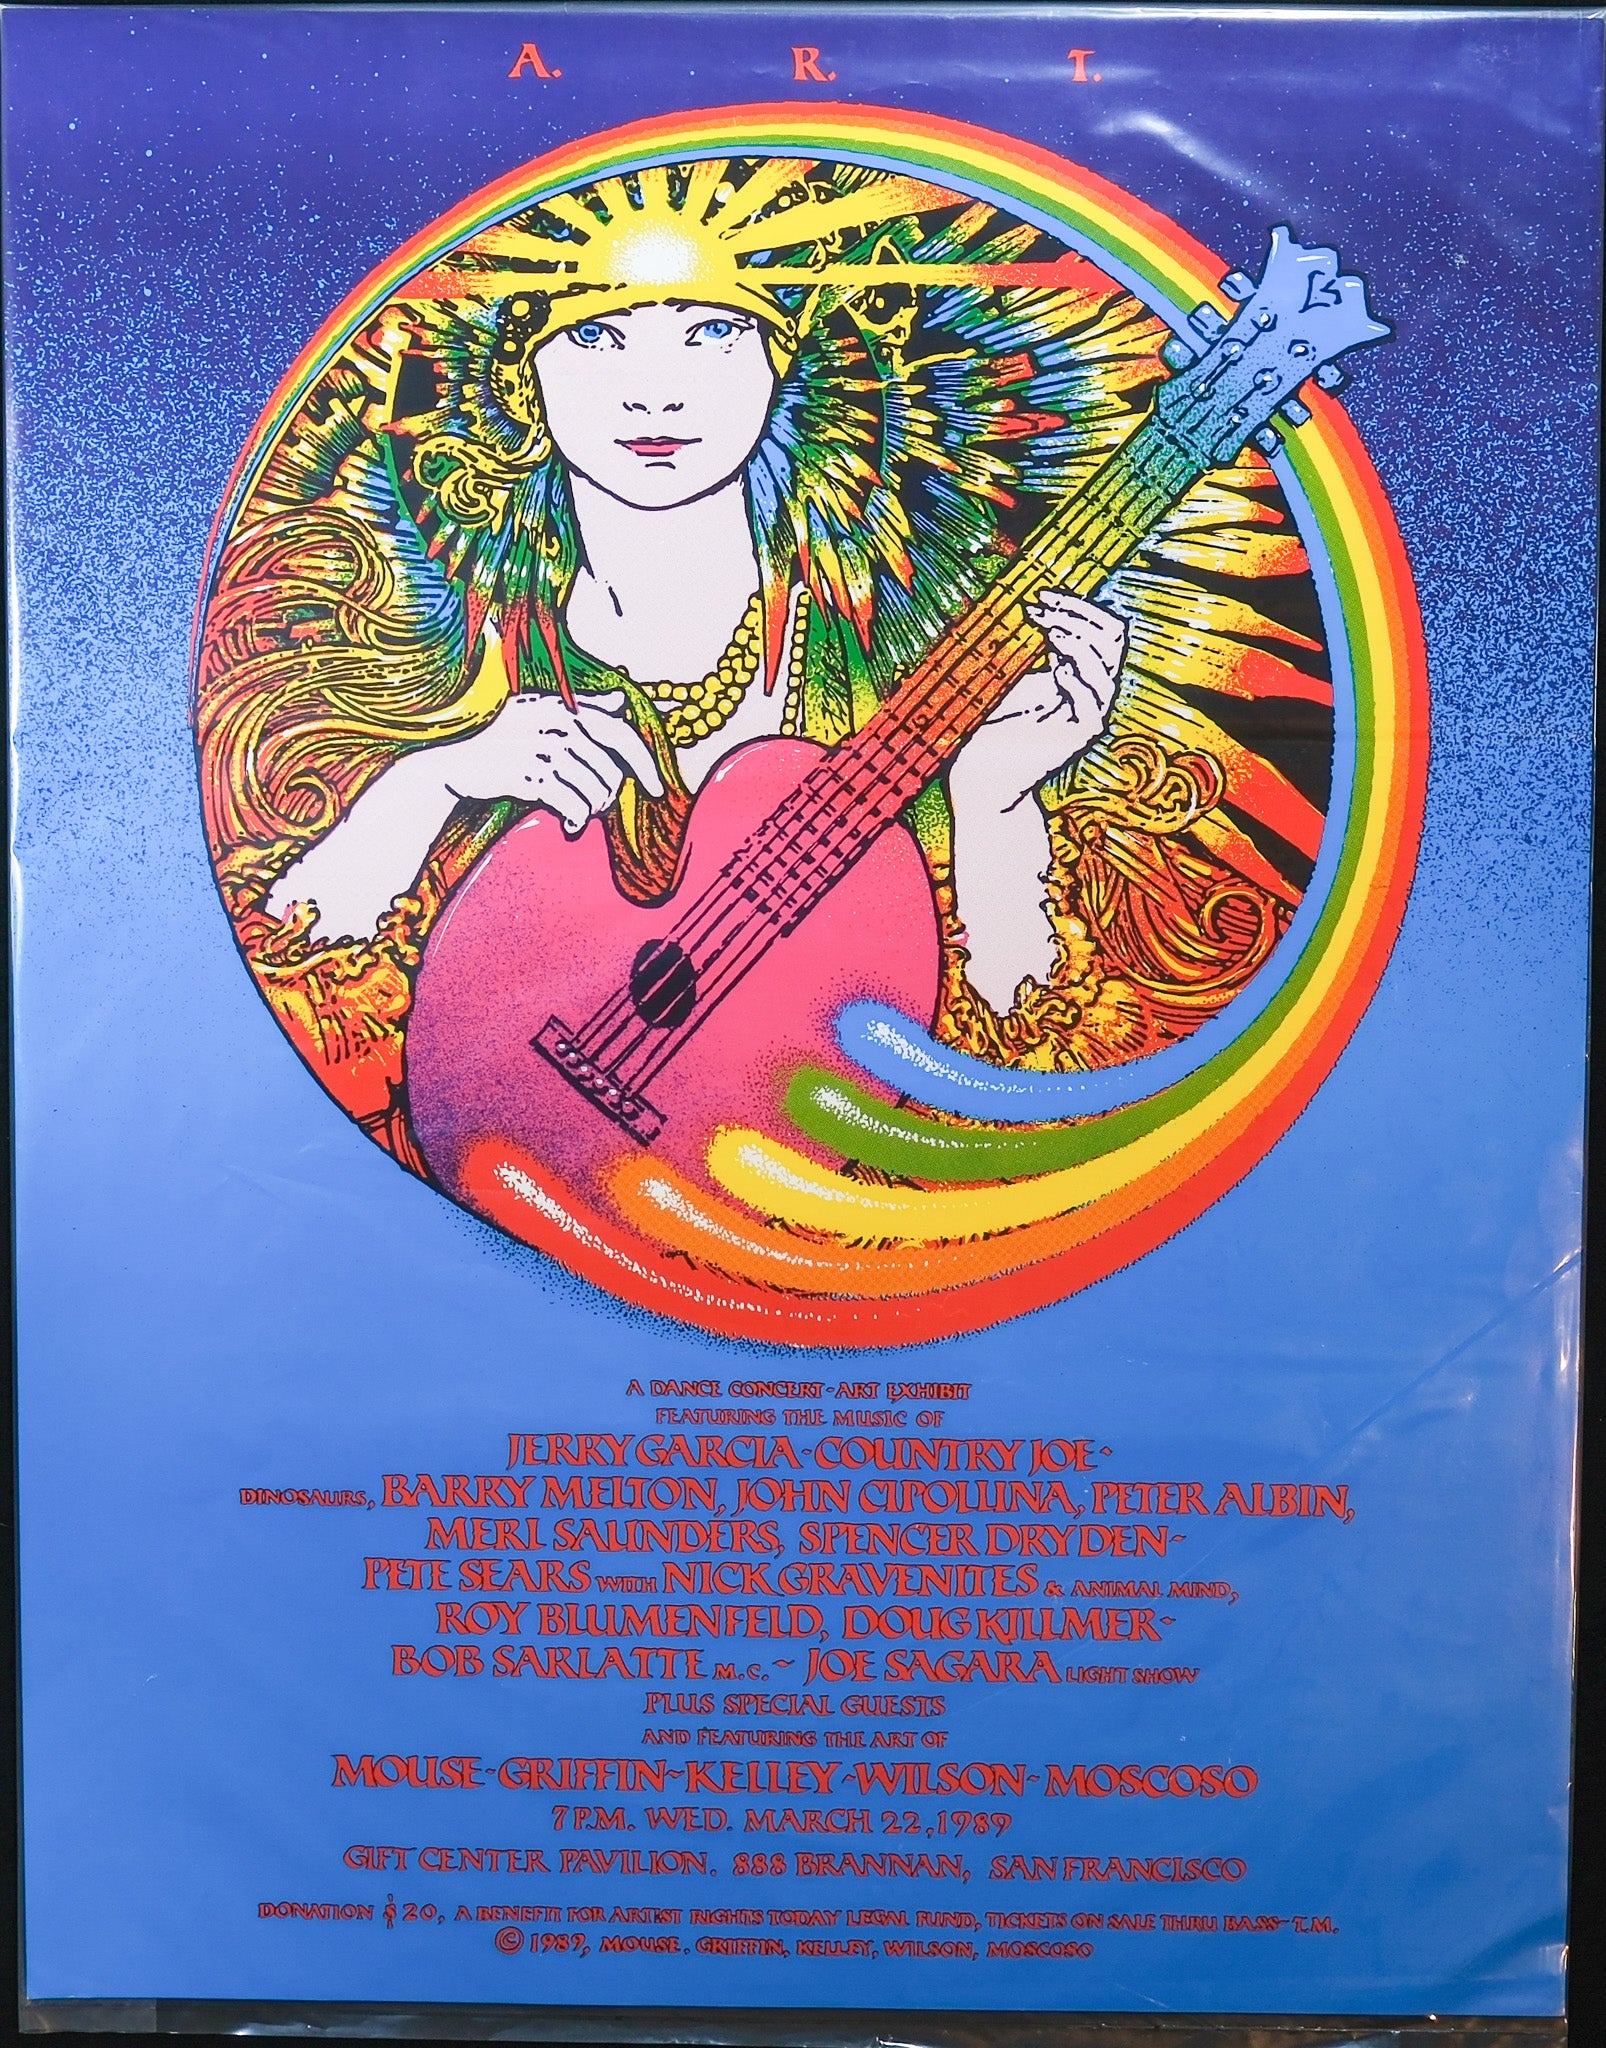 Stanley Mouse Artist Rights Today poster with woman and guitar